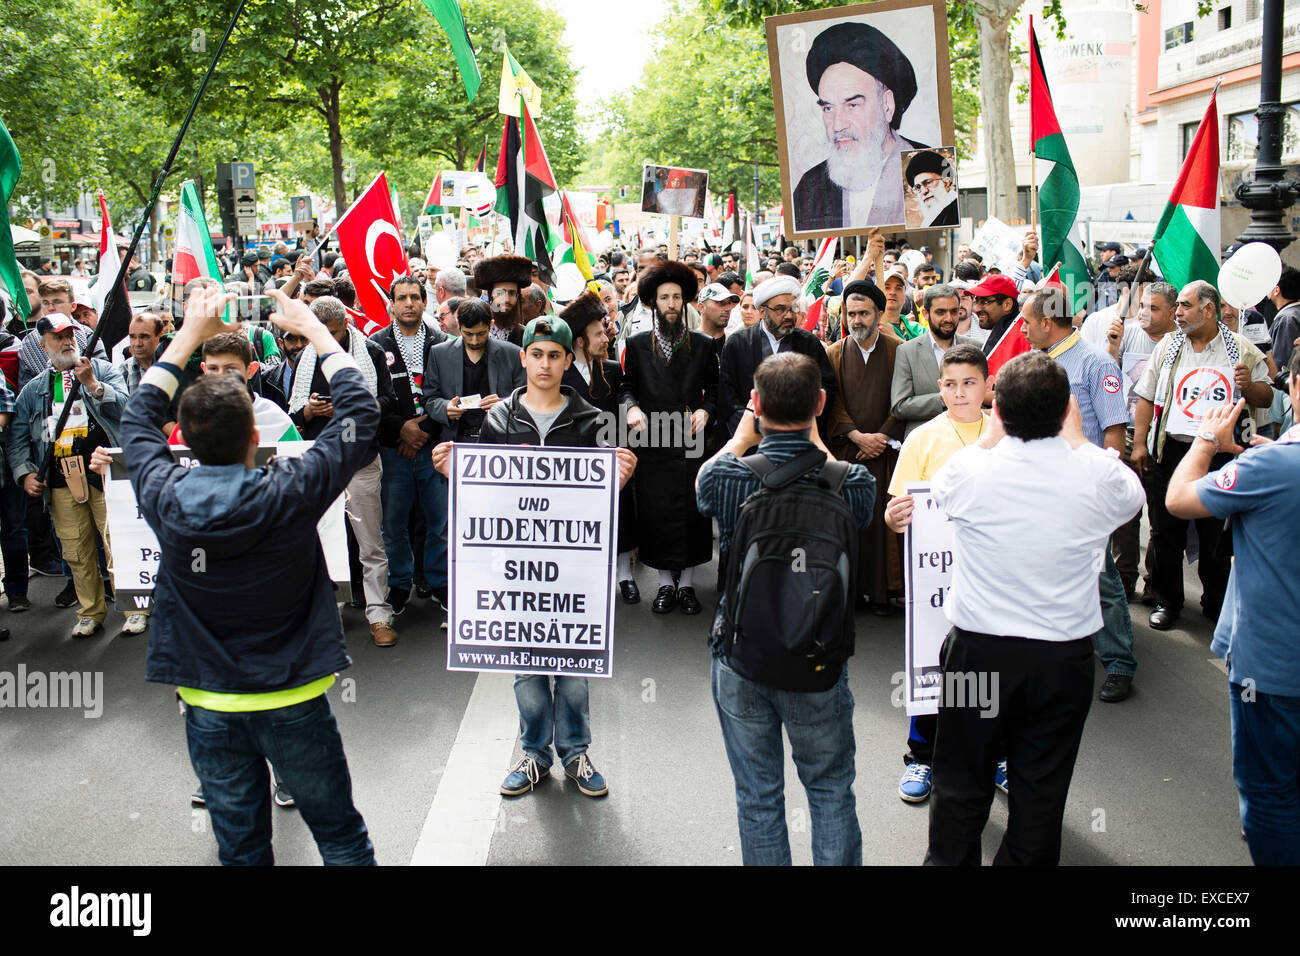 Berlin, Germany. 11th July, 2015. People march during a rally held in support of the Palestinian Territories and against zionism on occasion of the annual Quds Day in Berlin, Germany, 11 July 2015. A boy carries a sign that reads 'Zionismus und Judentum sind extreme Gegensaetze' (lit. zionism and judaism are extreme contradictions) as other participants hold up a picture of Ayatollah Khomeini. Anti-Israeli rallies are held in Iran on Quds Day. Photo: GREGOR FISCHER/dpa/Alamy Live News Stock Photo